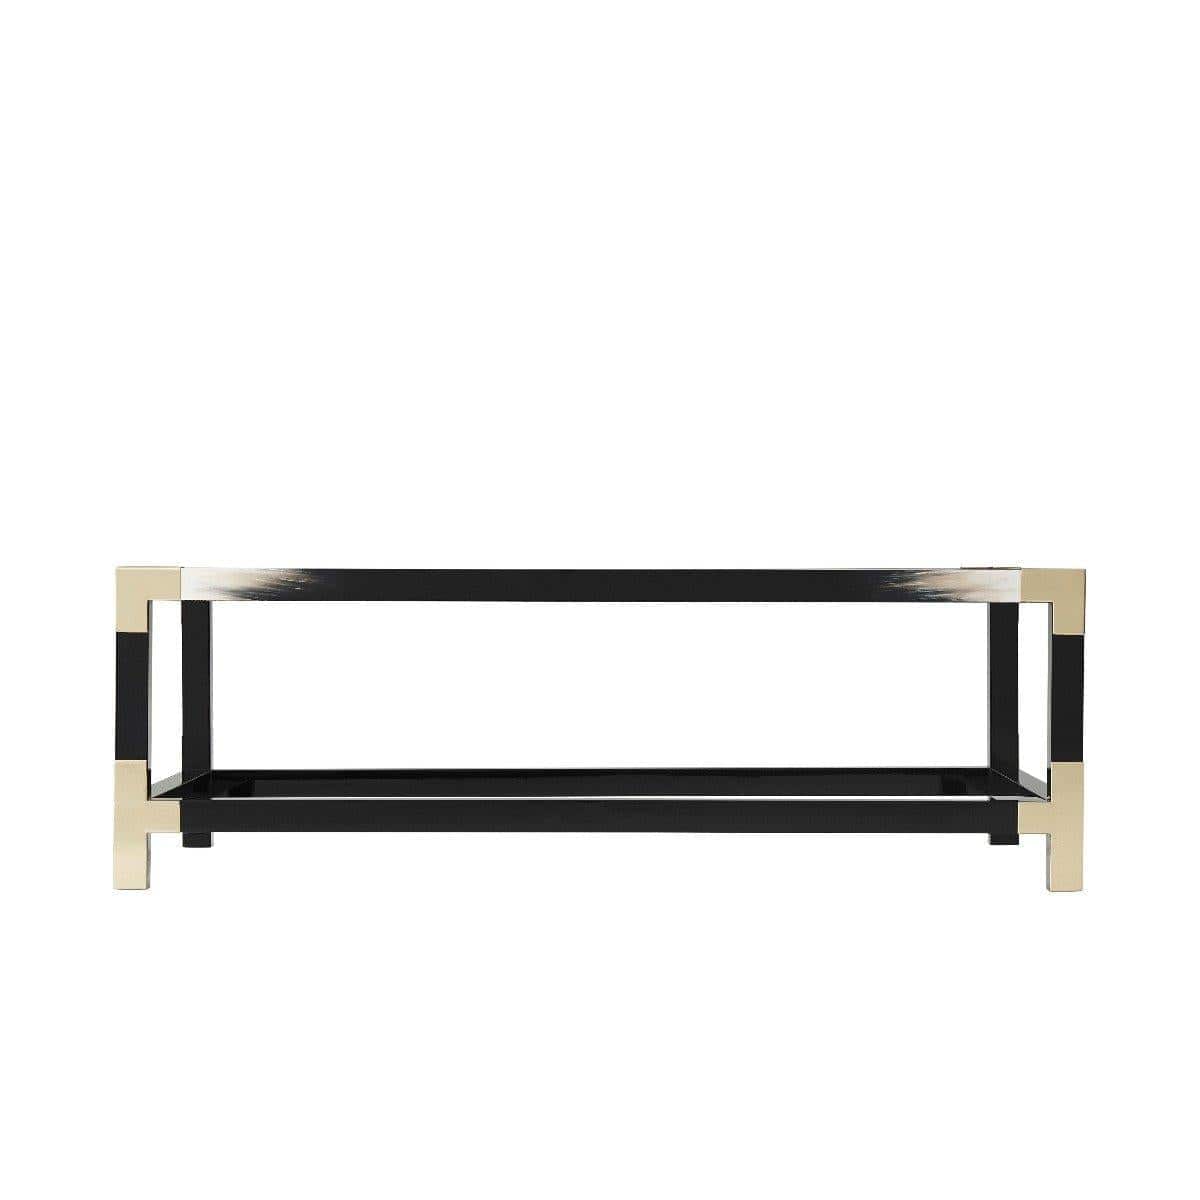 Theodore Alexander Living Theodore Alexander Cutting Edge Coffee Table in Black House of Isabella UK